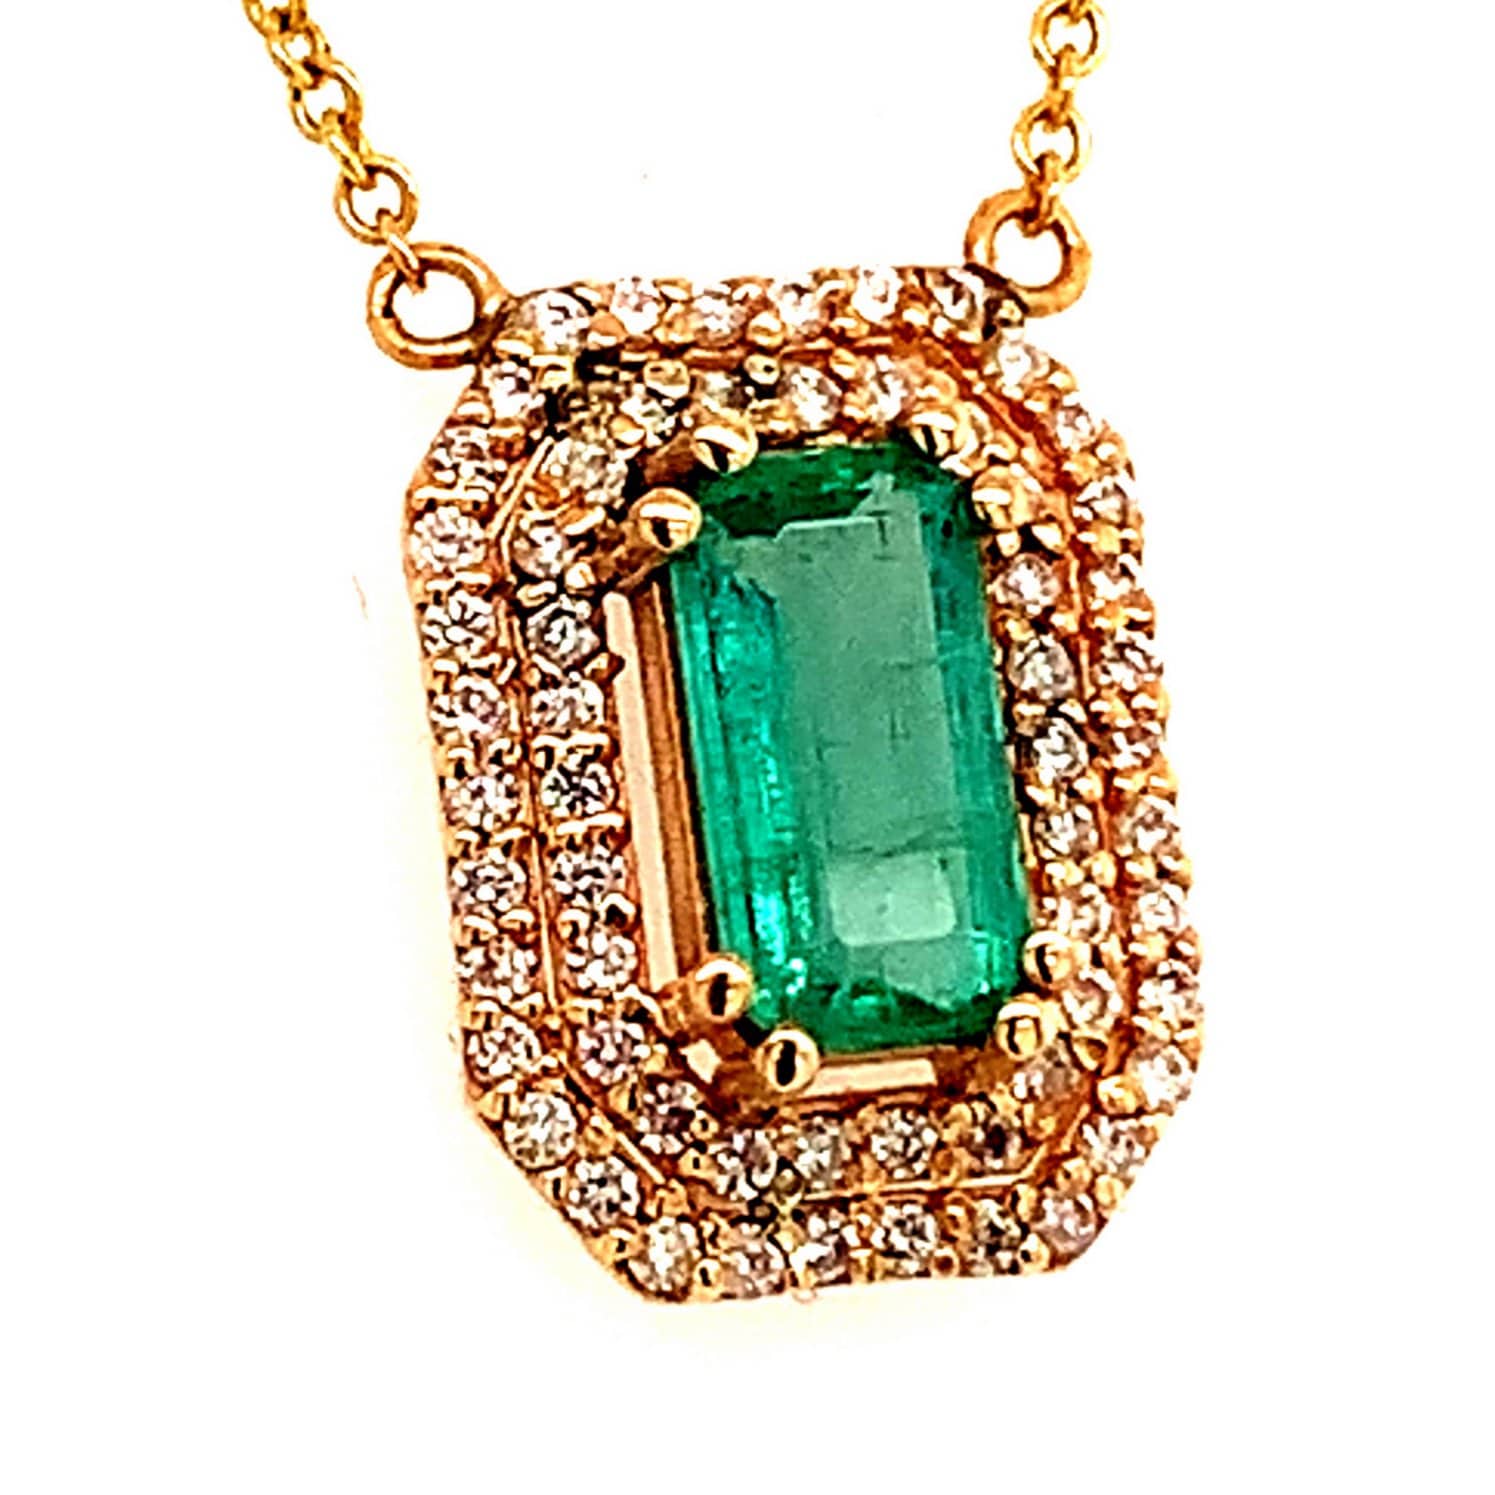 Natural Emerald Diamond Necklace 14k Gold 1.21 TCW 16" Certified $4,950 112176 - Certified Estate Jewelry